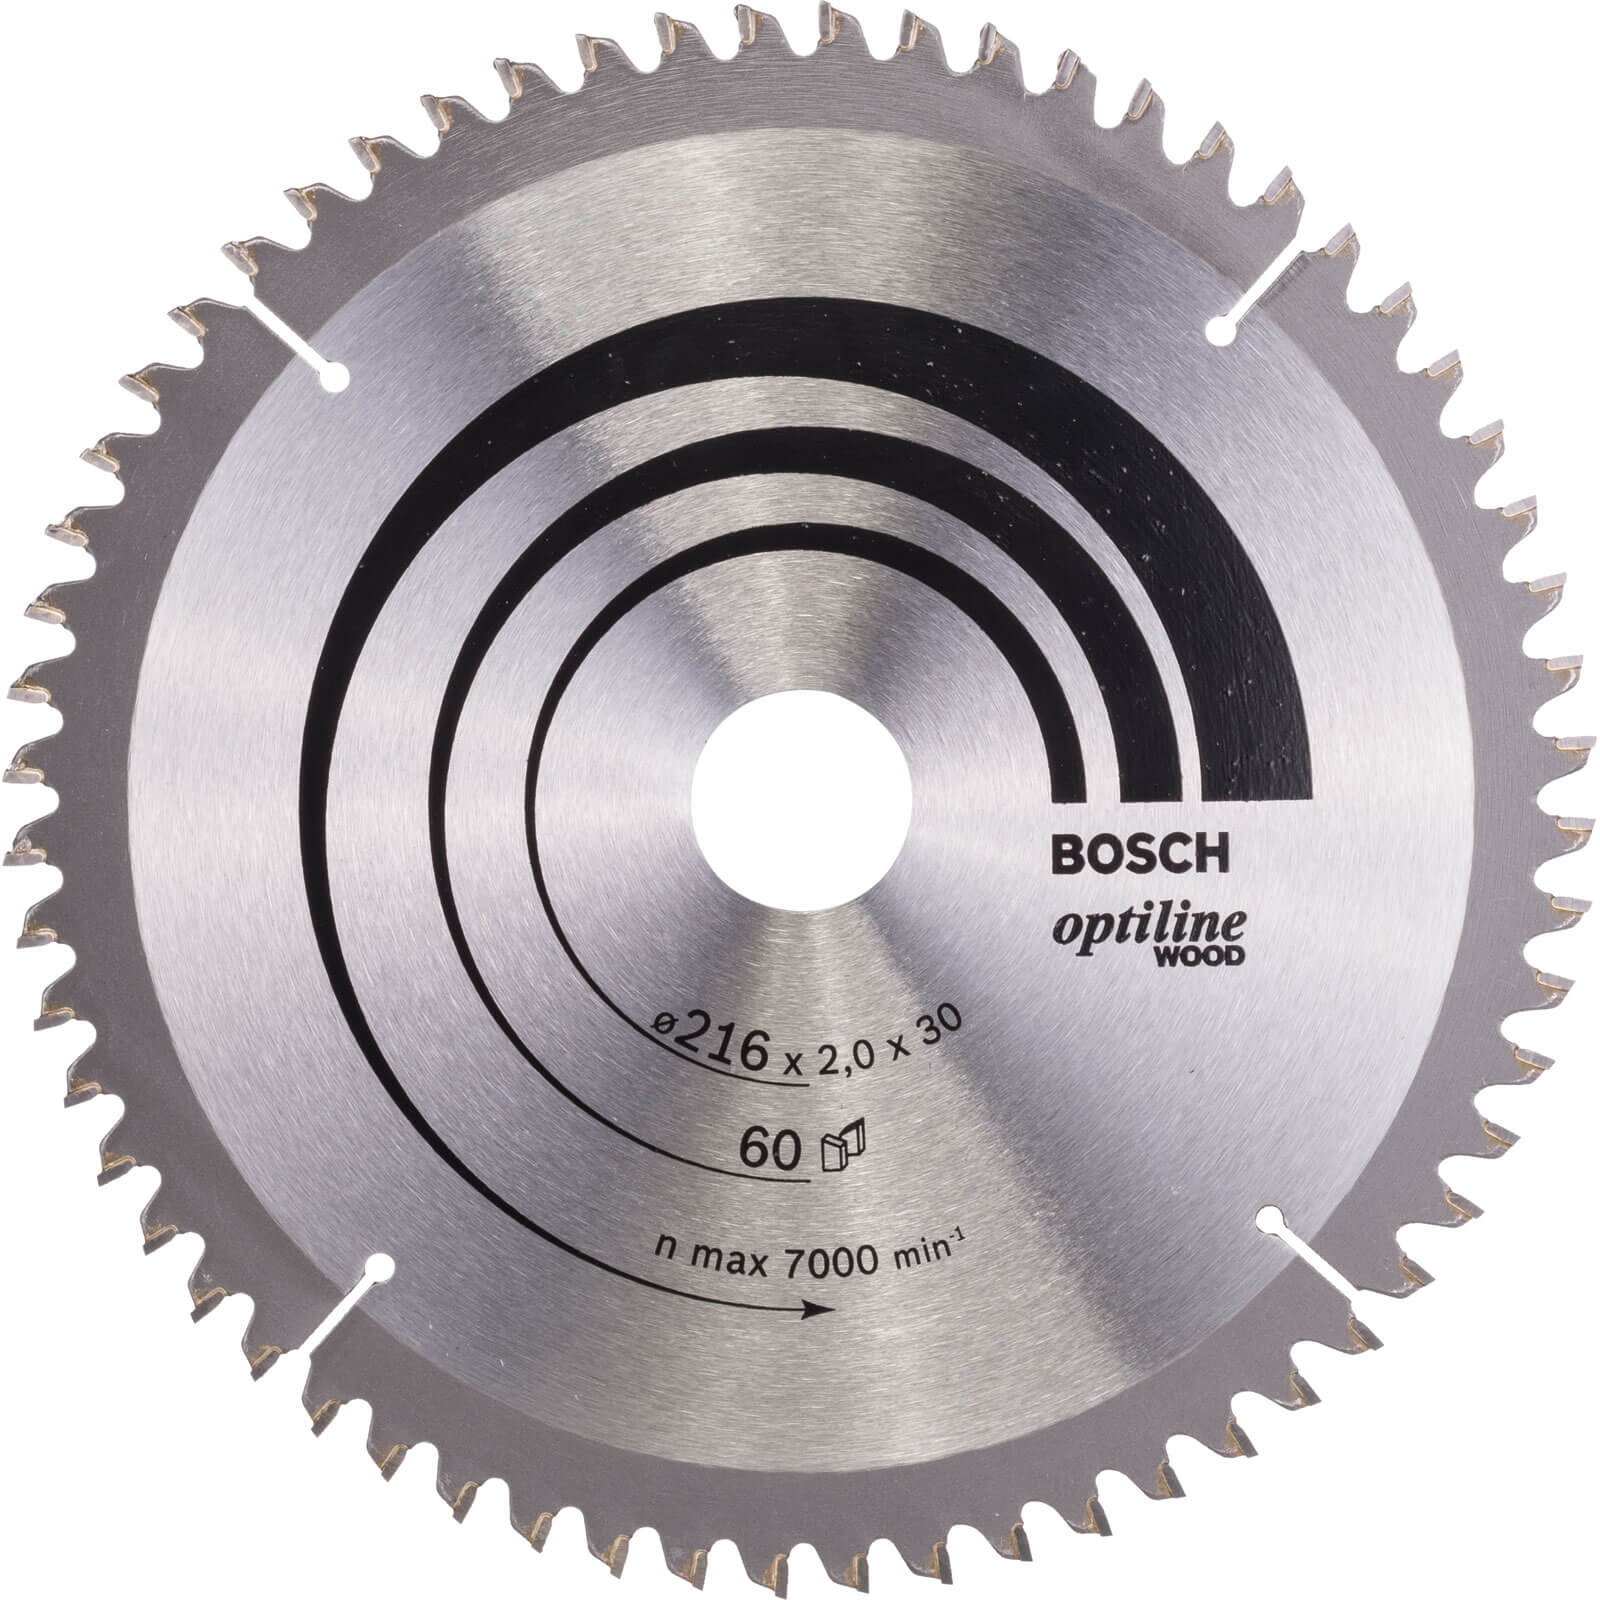 Image of Bosch Optiline Wood Cutting Mitre Saw Blade 216mm 60T 30mm